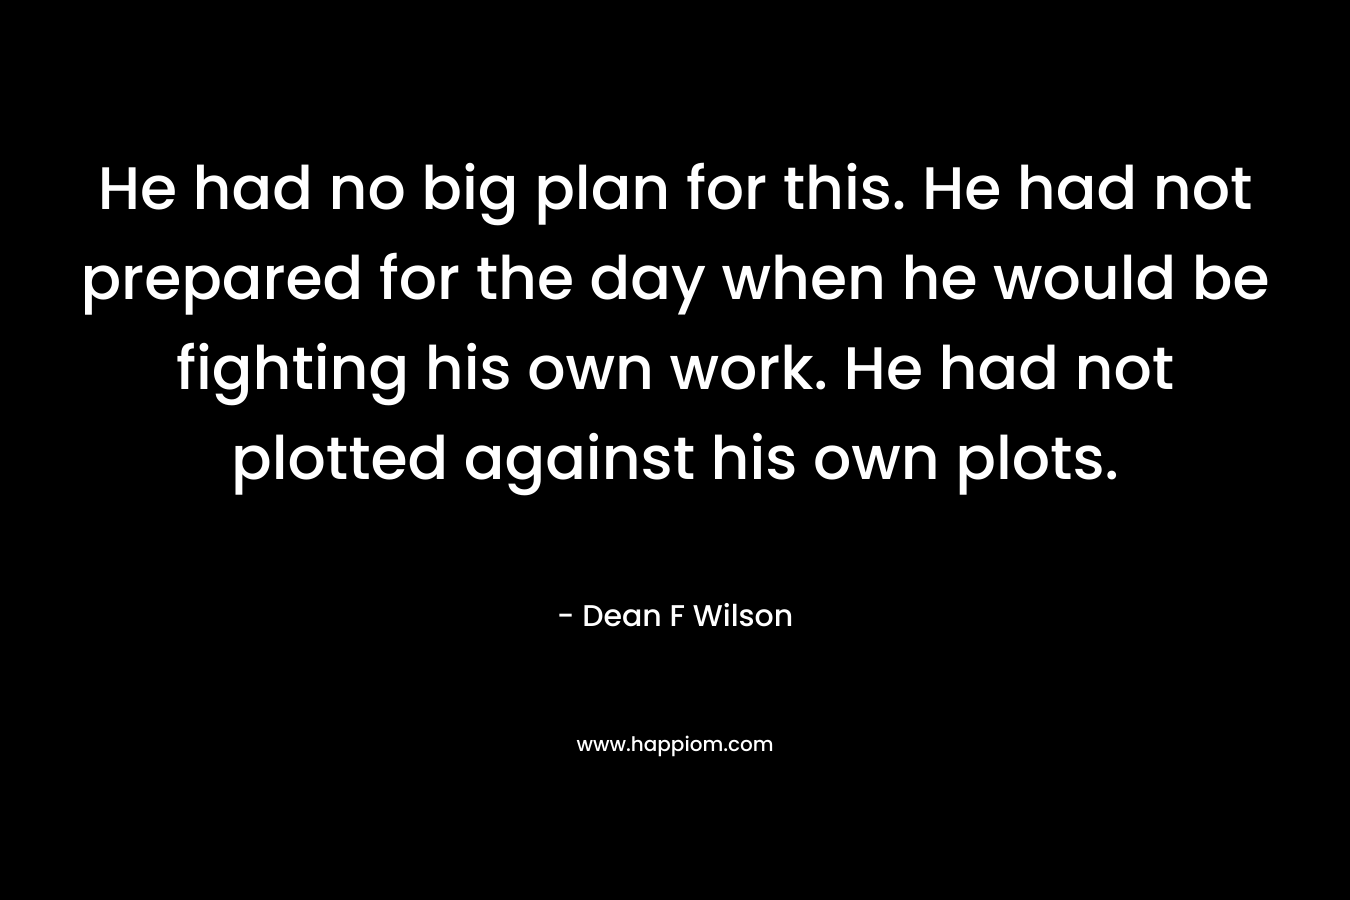 He had no big plan for this. He had not prepared for the day when he would be fighting his own work. He had not plotted against his own plots. – Dean F Wilson